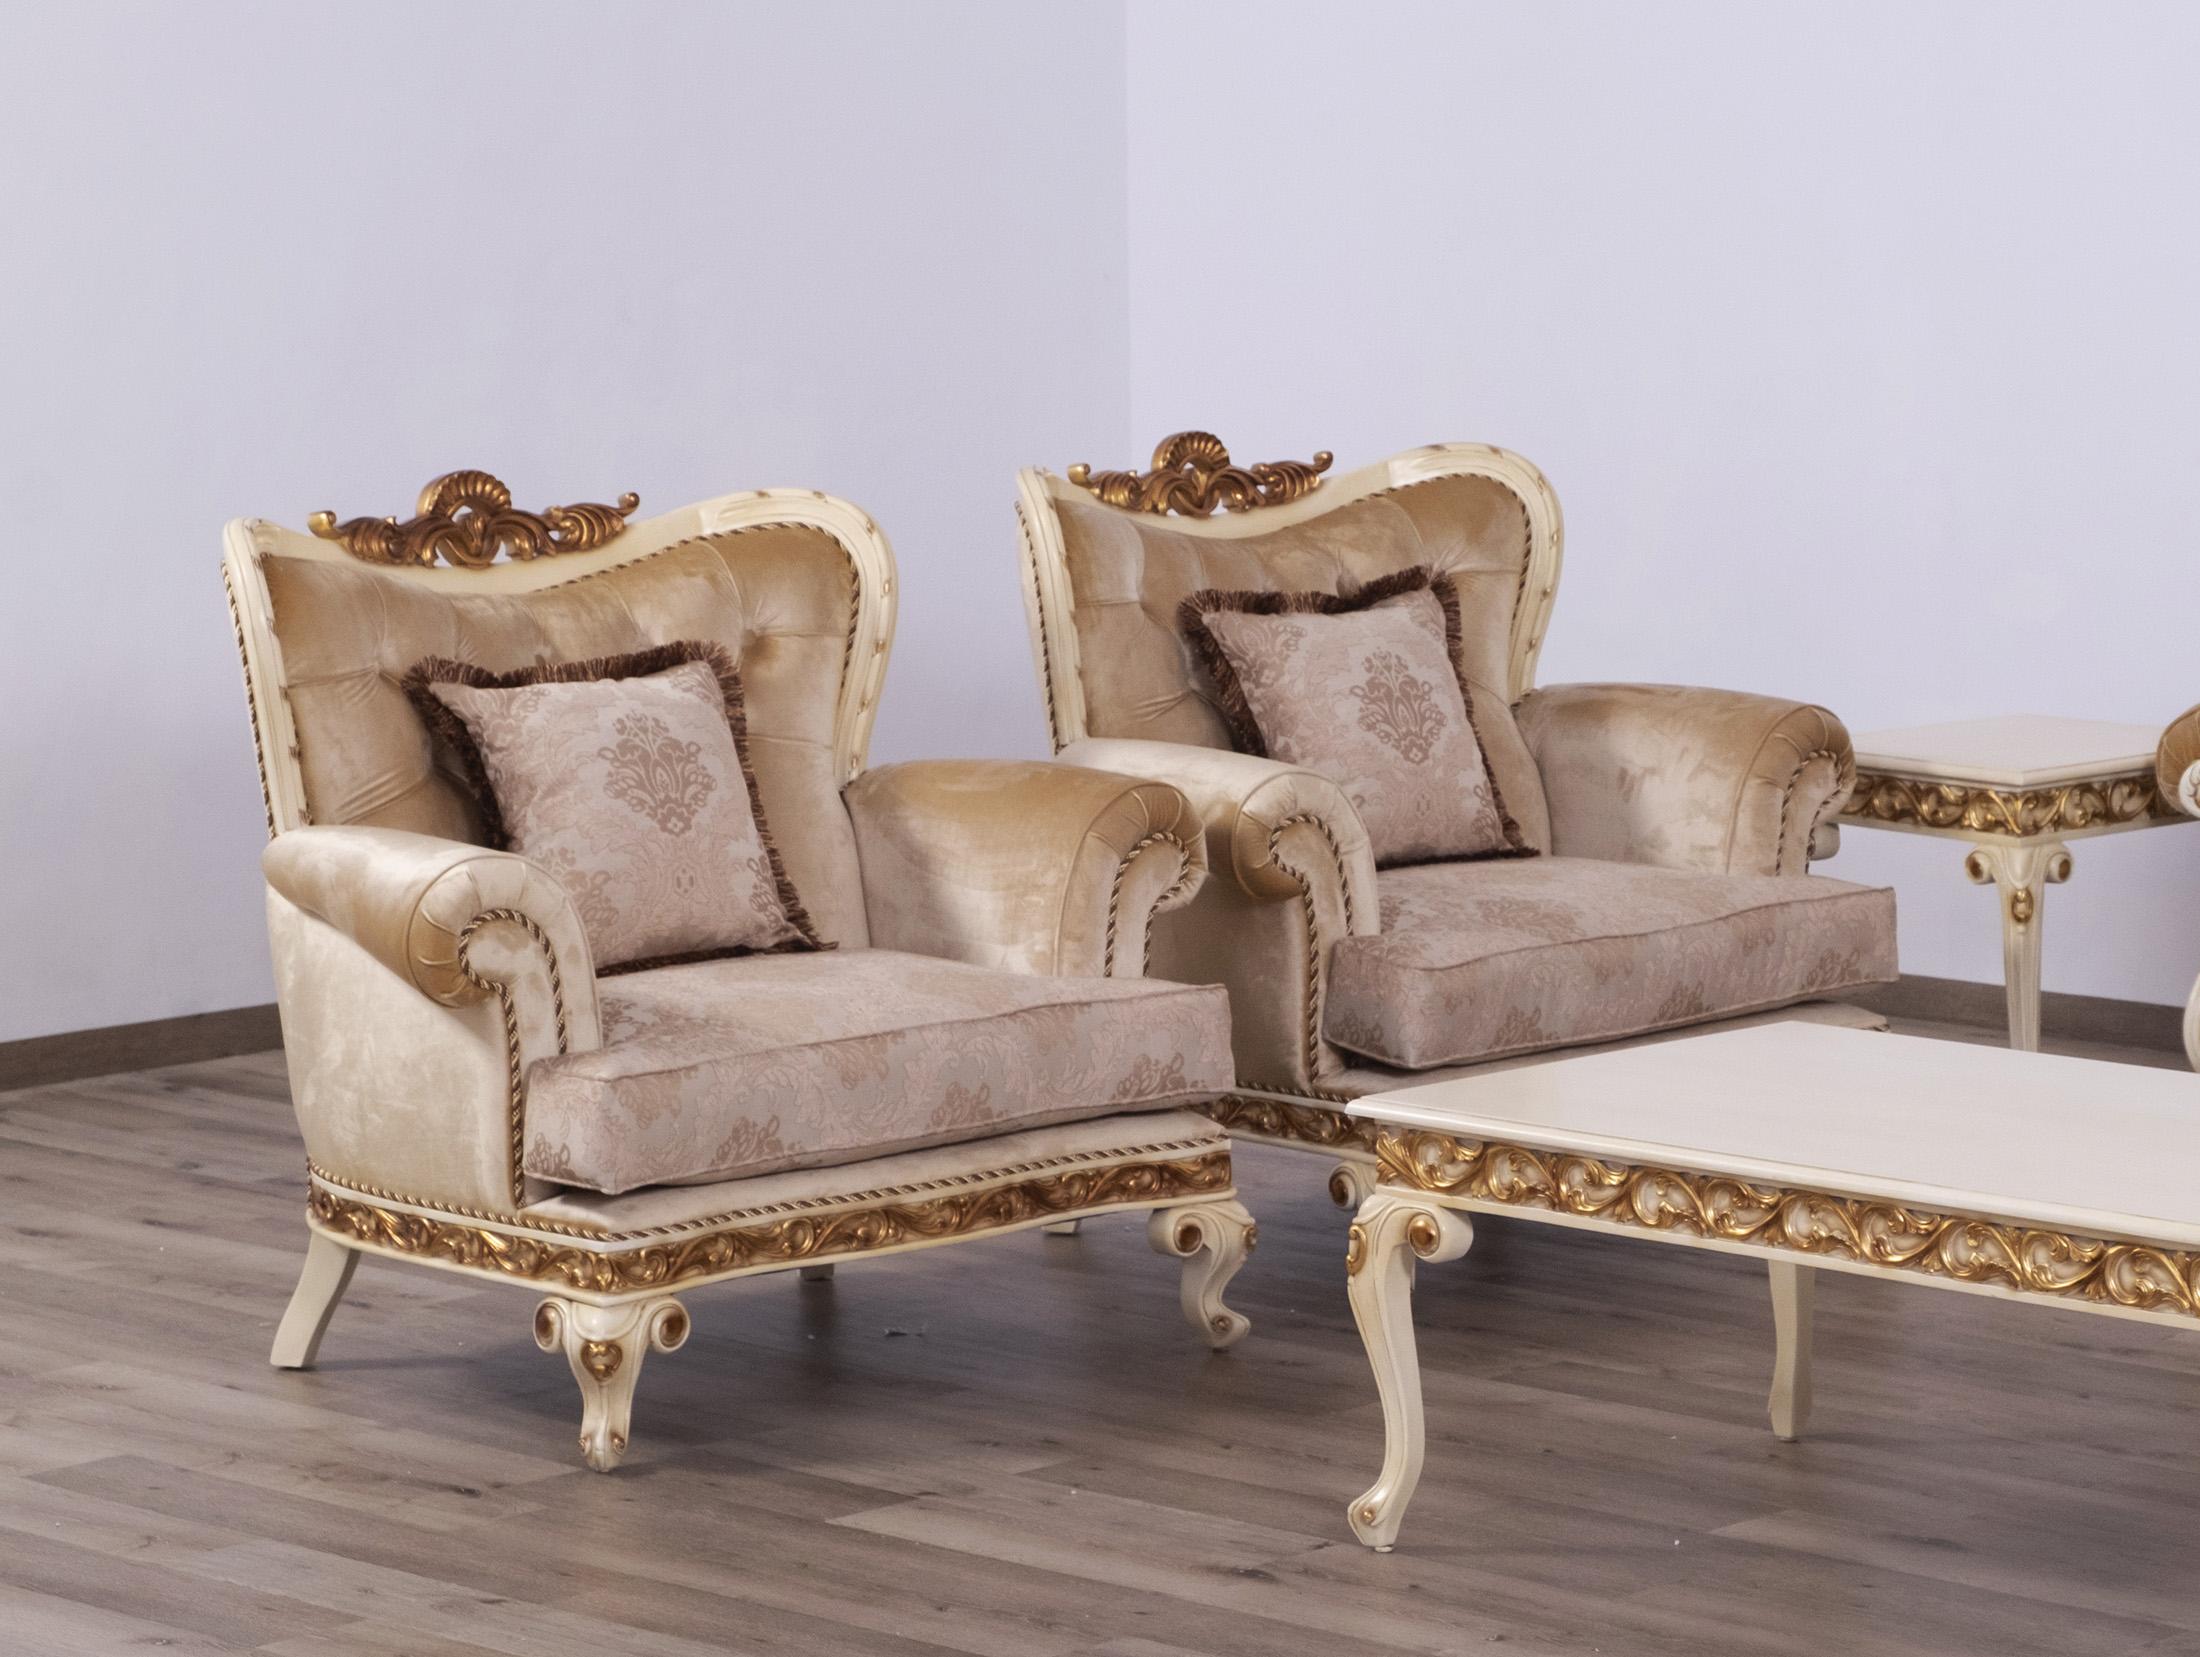 Classic, Traditional Arm Chair Set FANTASIA 40017-C-Set-2 in Sand, Gold, Beige Fabric